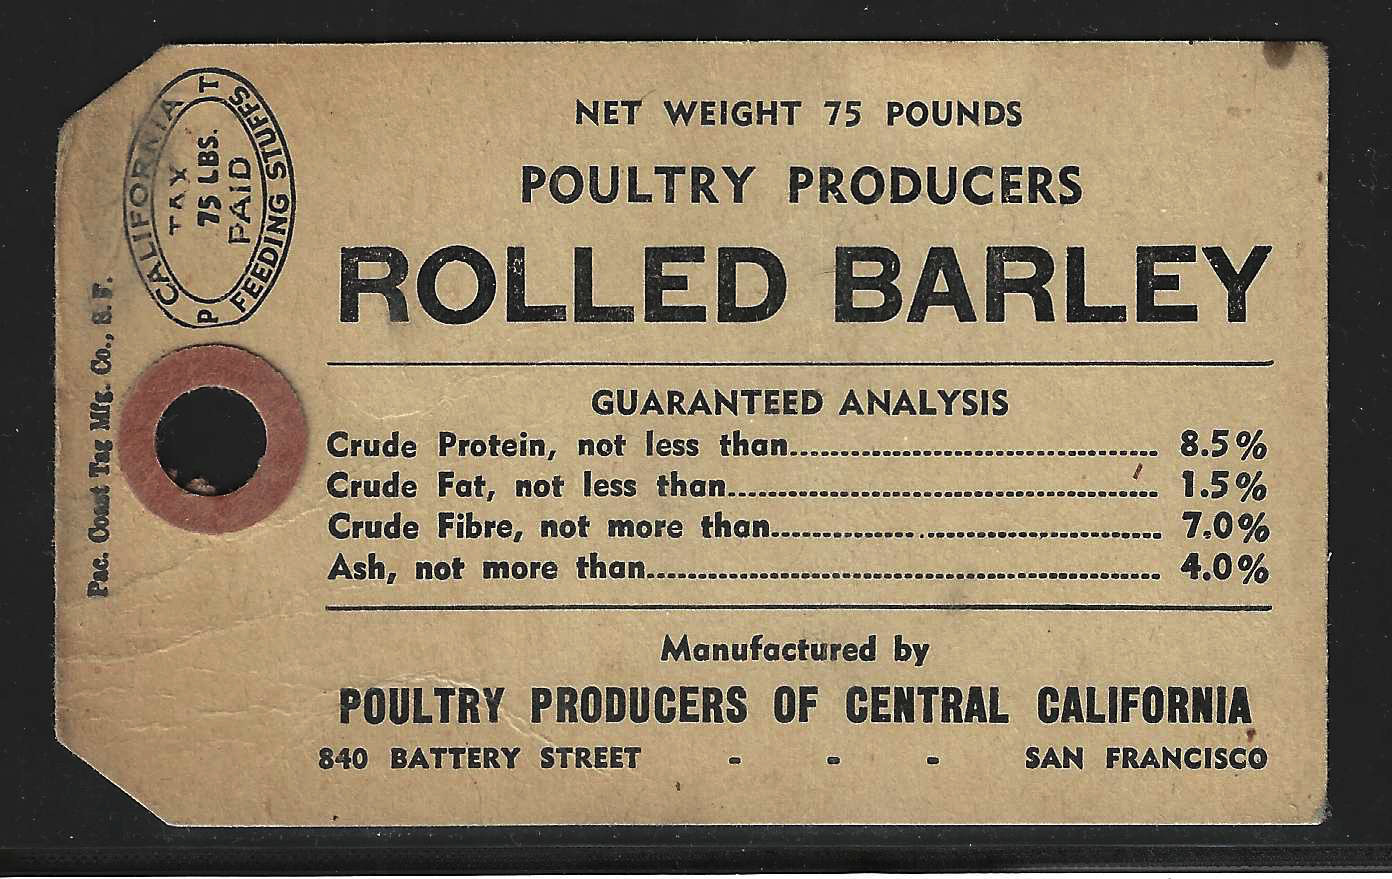 CA feed tag FET 83 75 lbs (PT) horz. format Rolled Barley Poultry Producers of Central California, not recorded in the Joe Ross Catalog